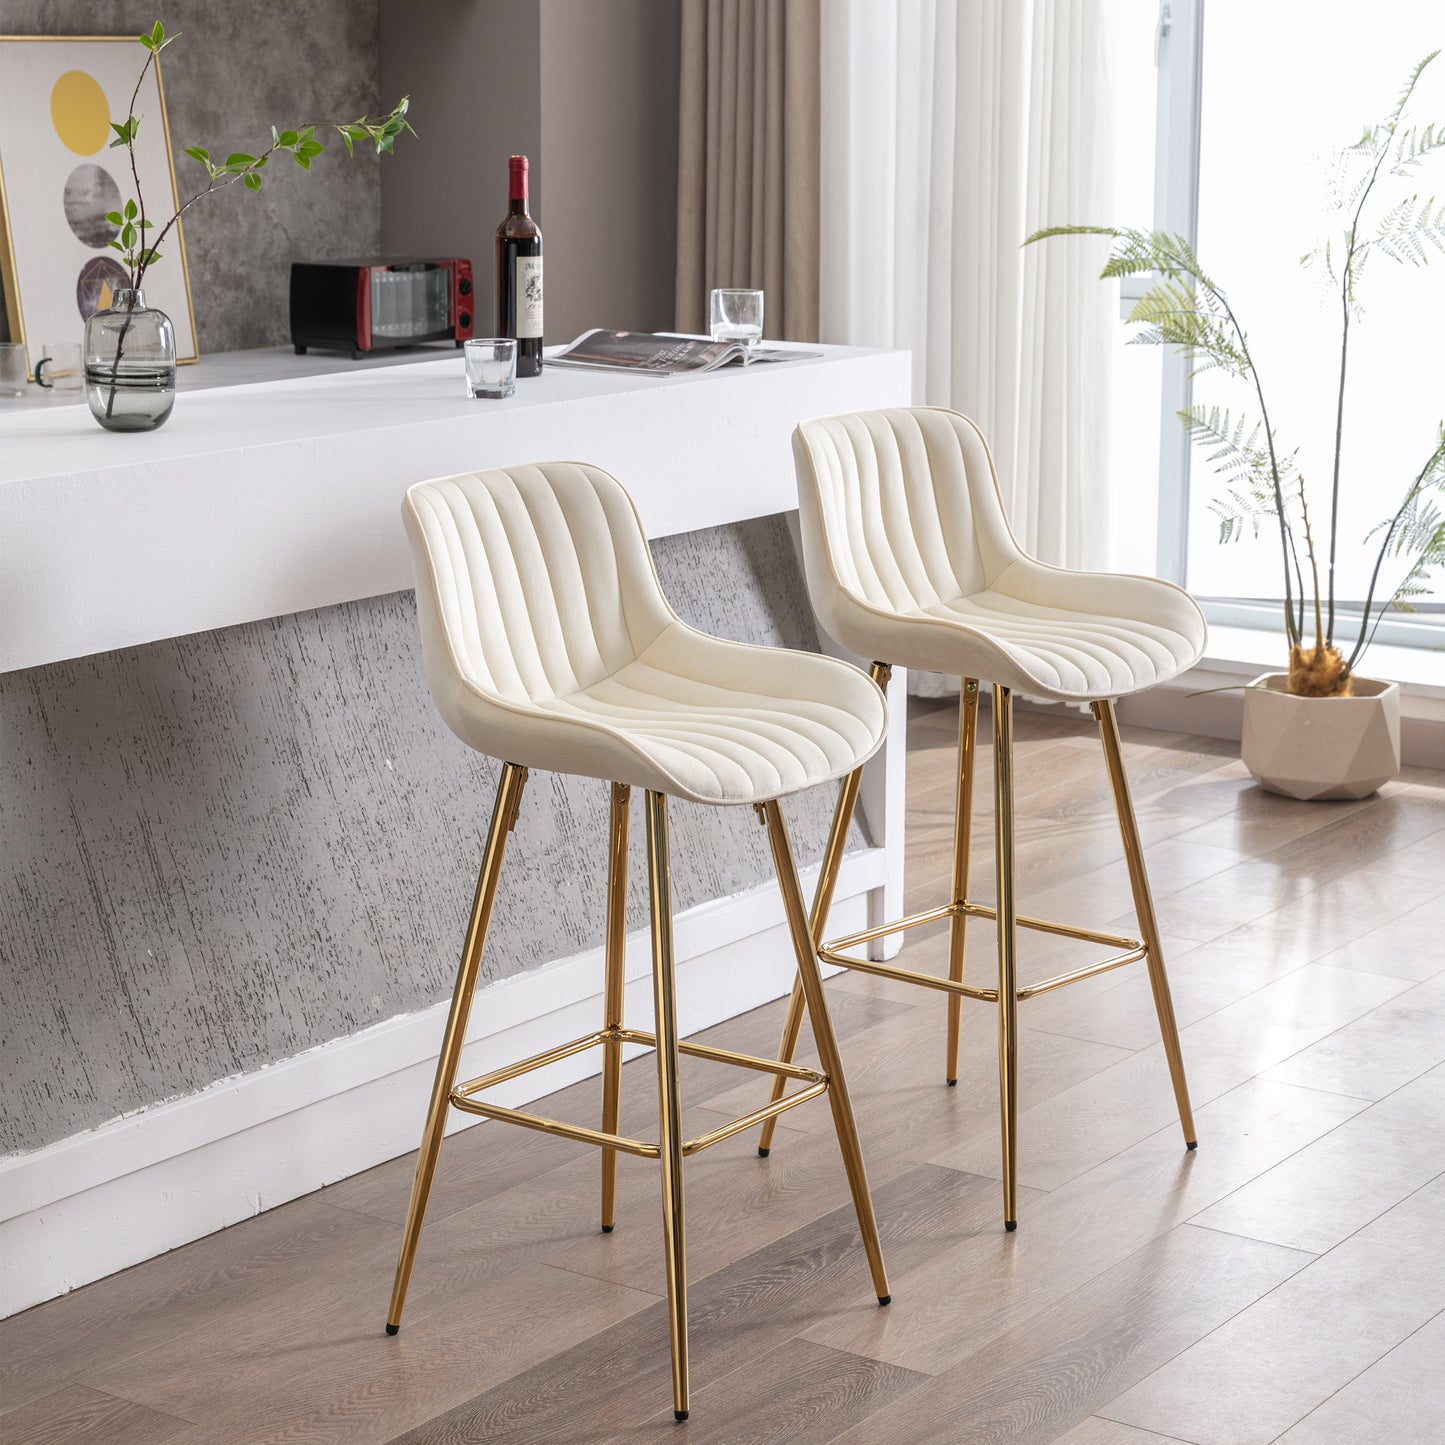 30 inch Set of 2 Bar Stools,with Chrome Footrest Velvet Fabric Counter Stool Golden Leg Simple High Bar Stool,CREAM - Enova Luxe Home Store